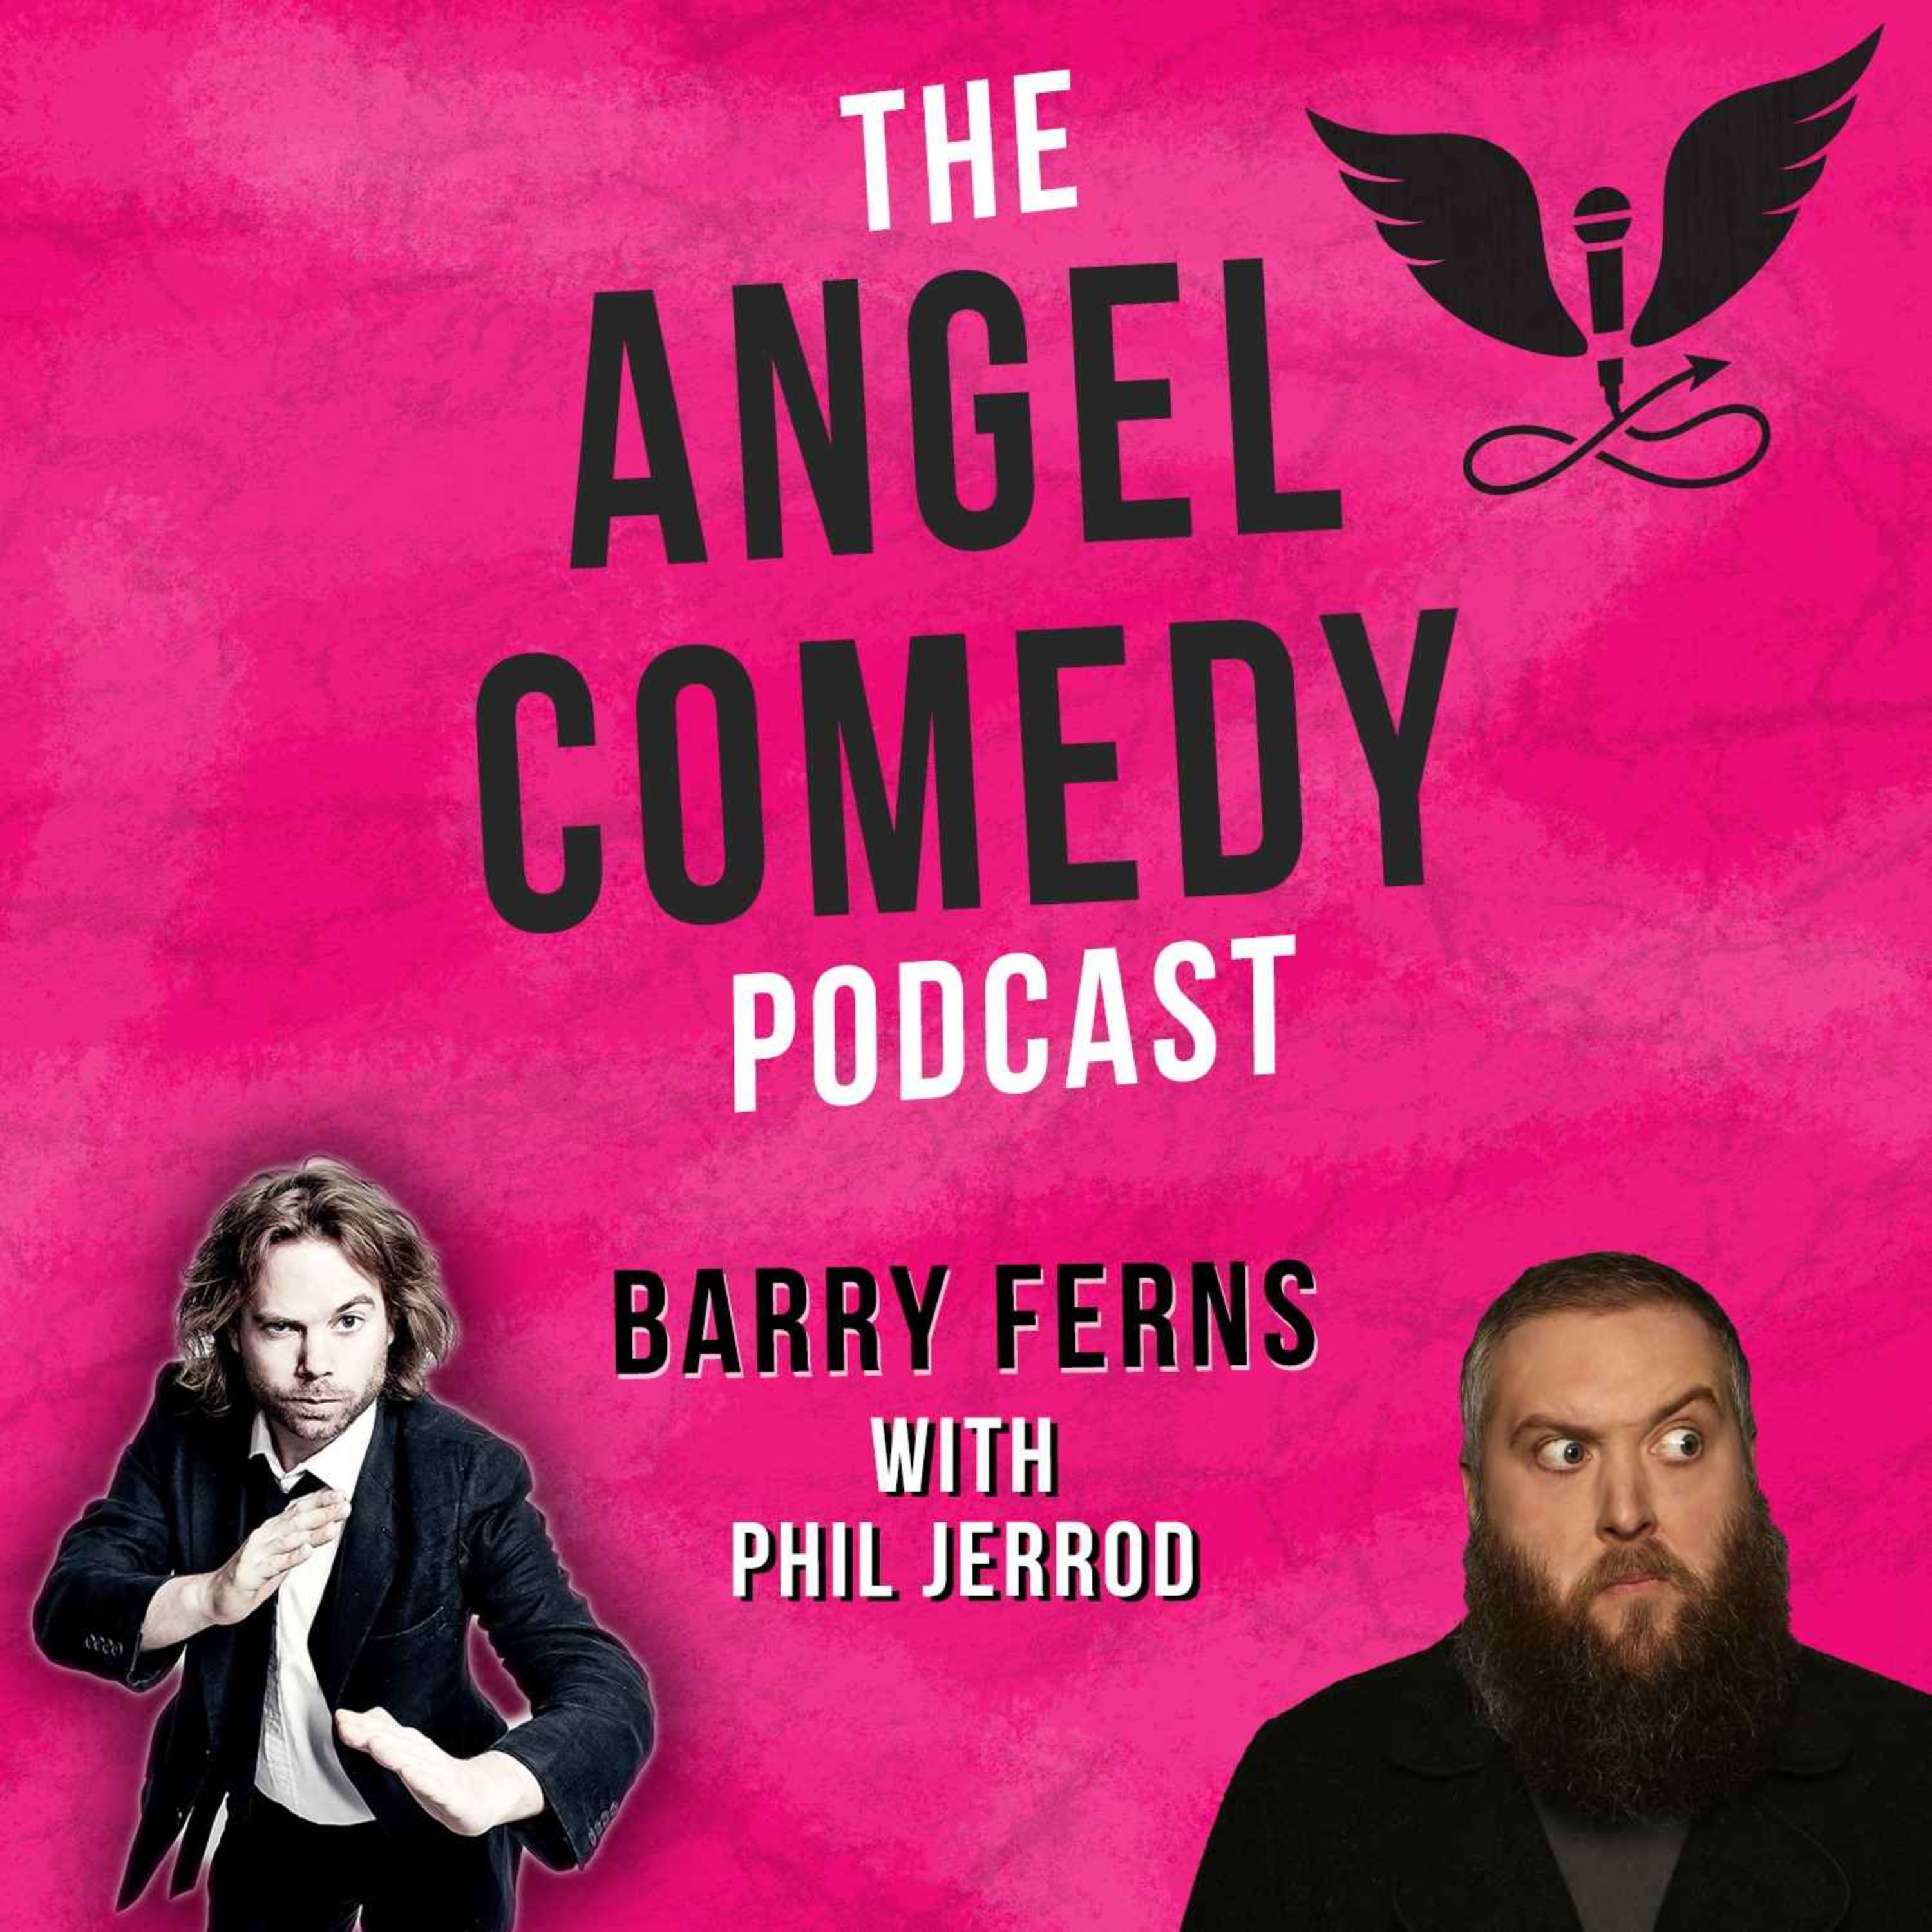 Podcast: The Angel Comedy Podcast with Phil Jerrod - Angel Comedy